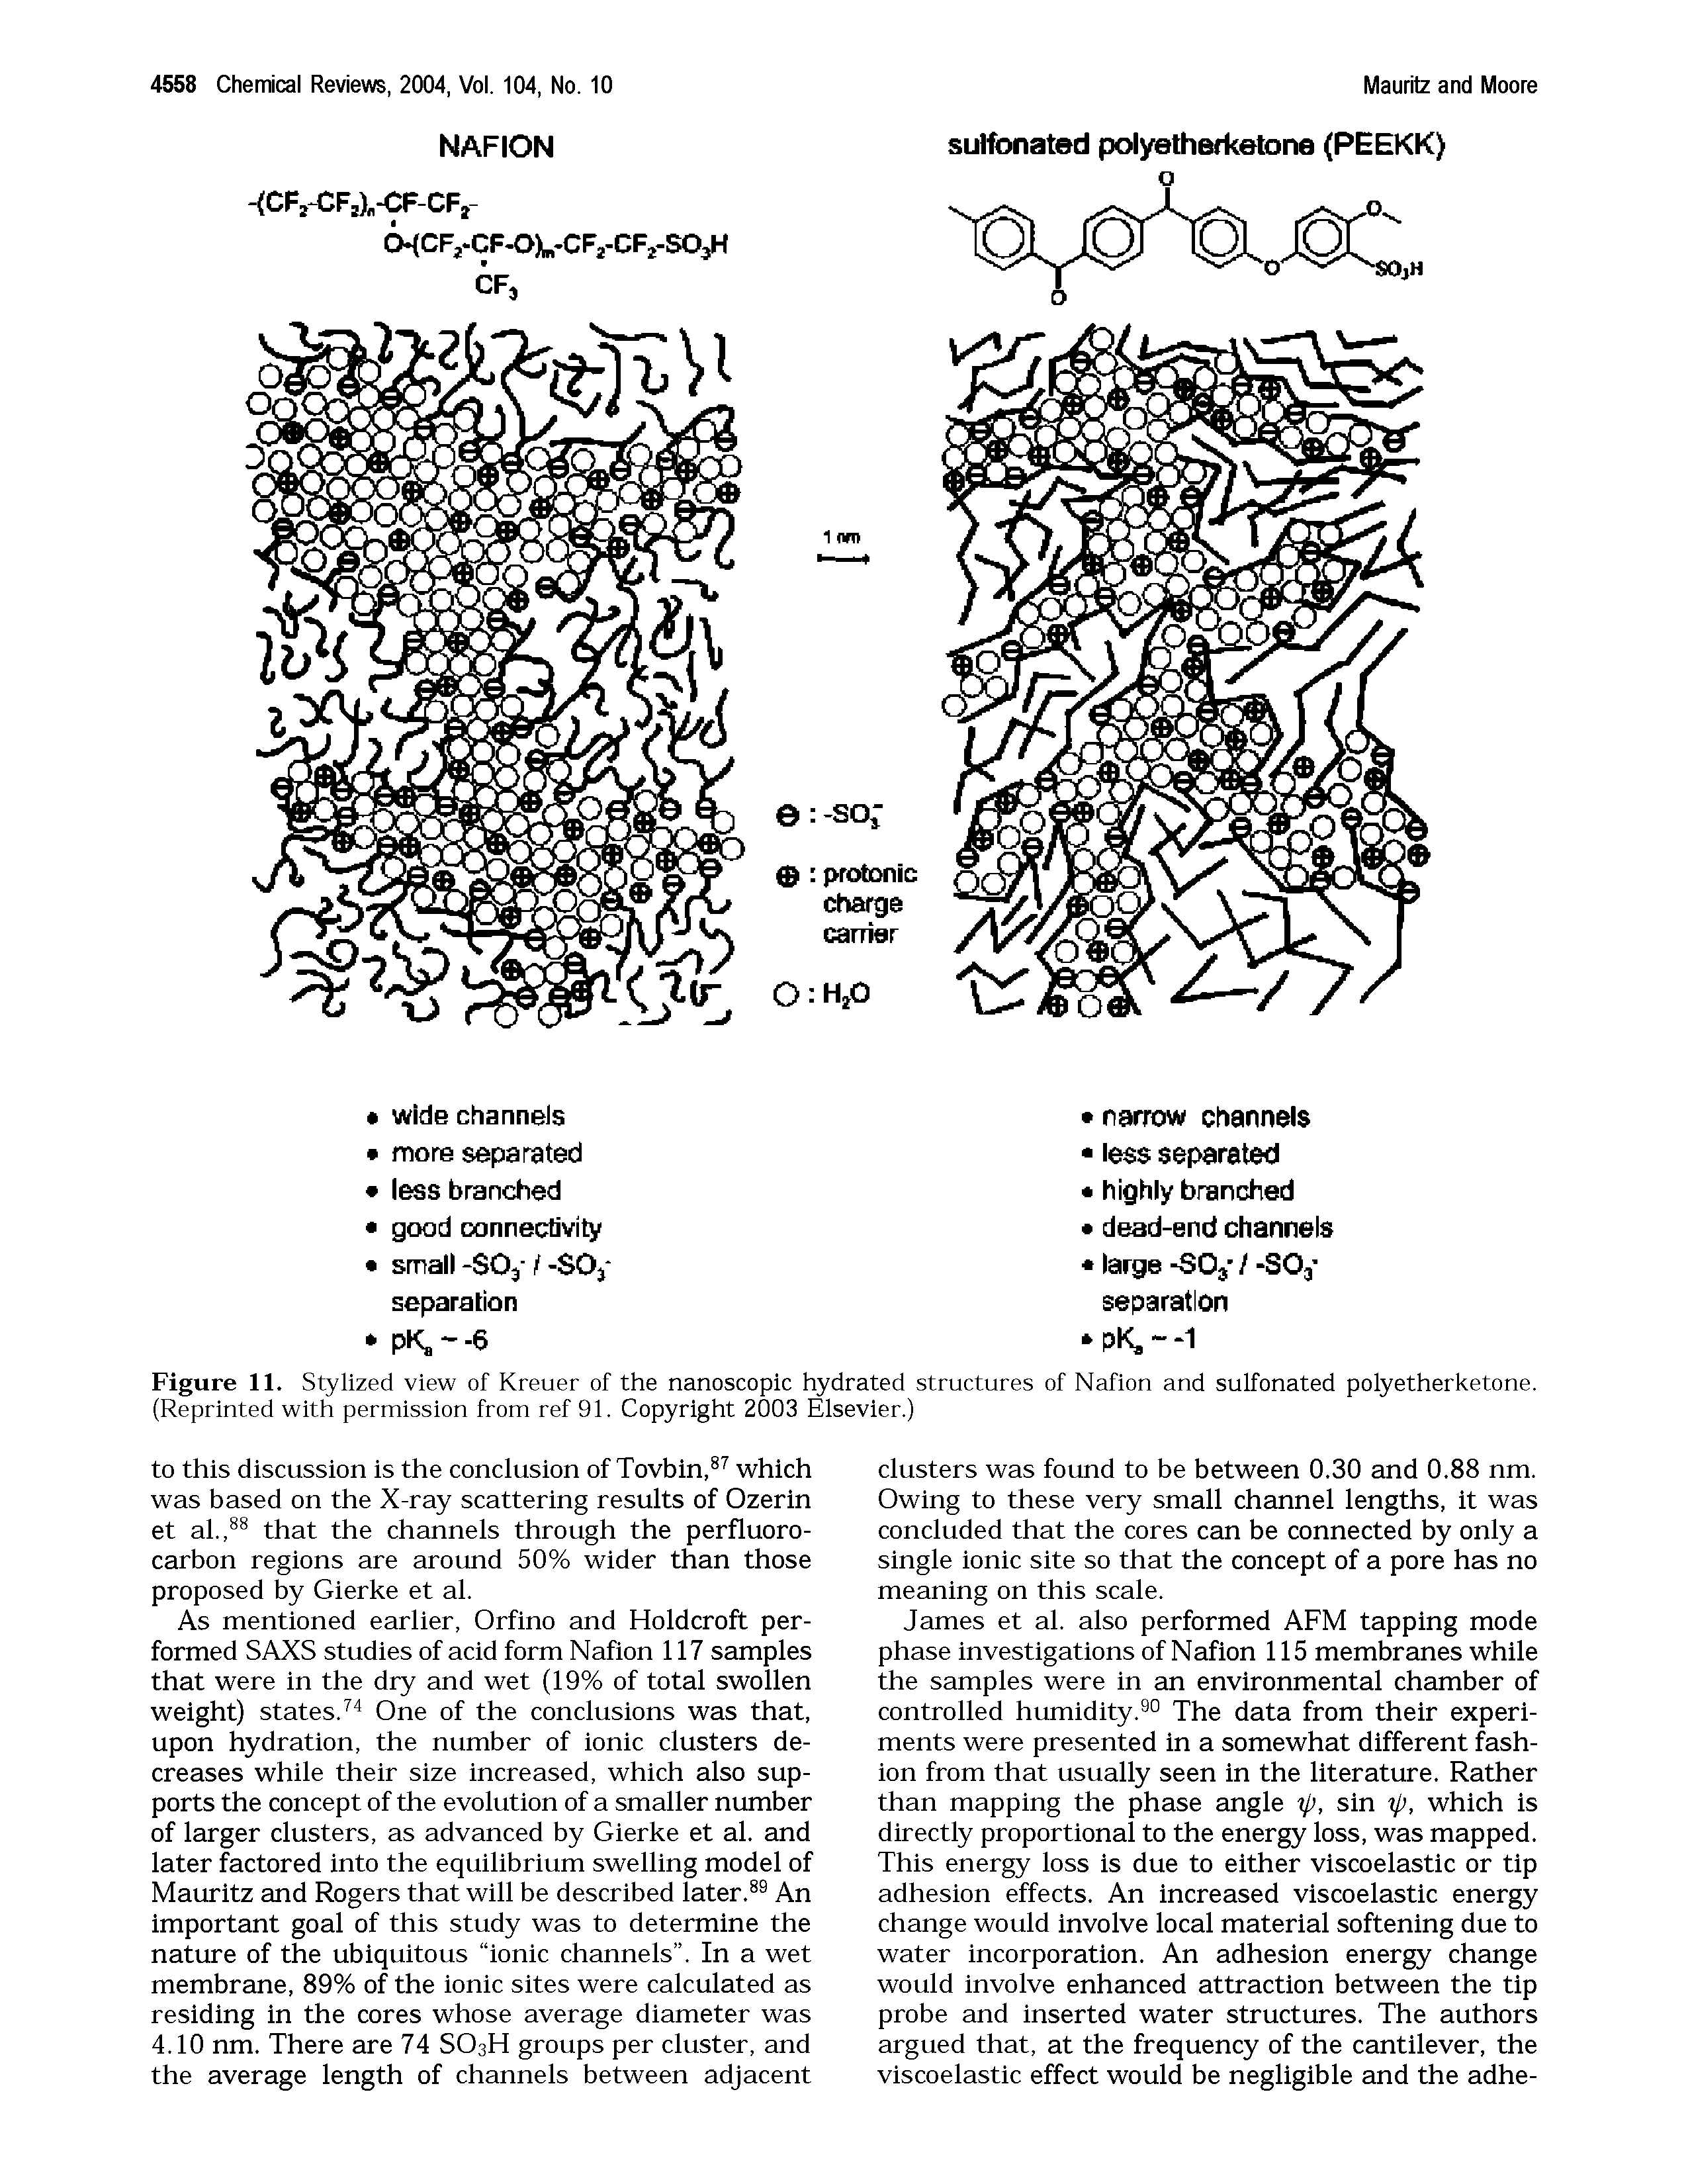 Figure 11. Stylized view of Kreuer of the nanoscopic hydrated structures of Nafion and sulfonated polyetherketone. (Reprinted with permission from ref 91. Copyright 2003 Elsevier.)...